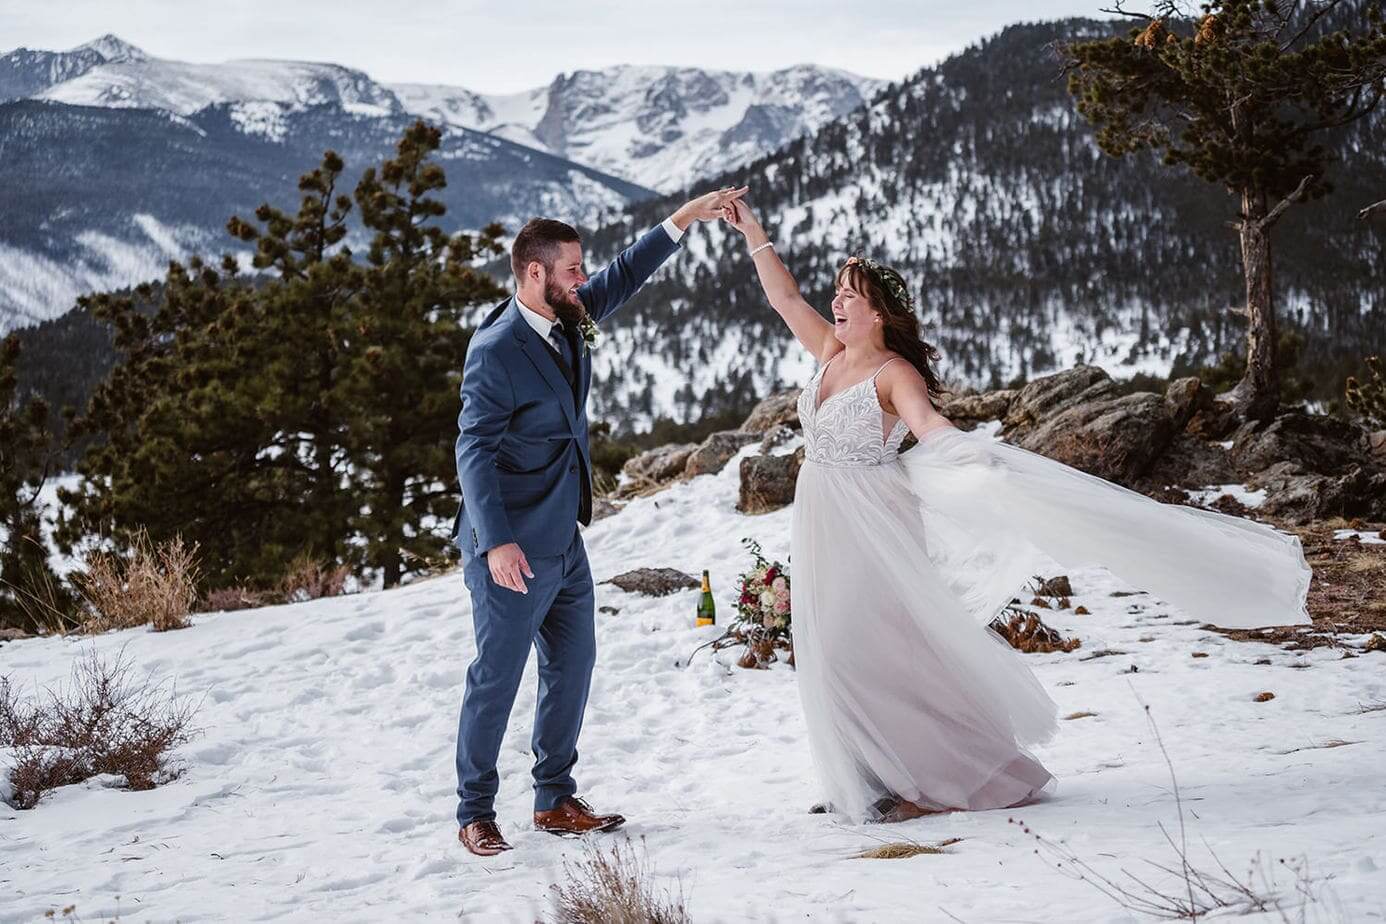 An elopement first dance in the snow of Colorado.